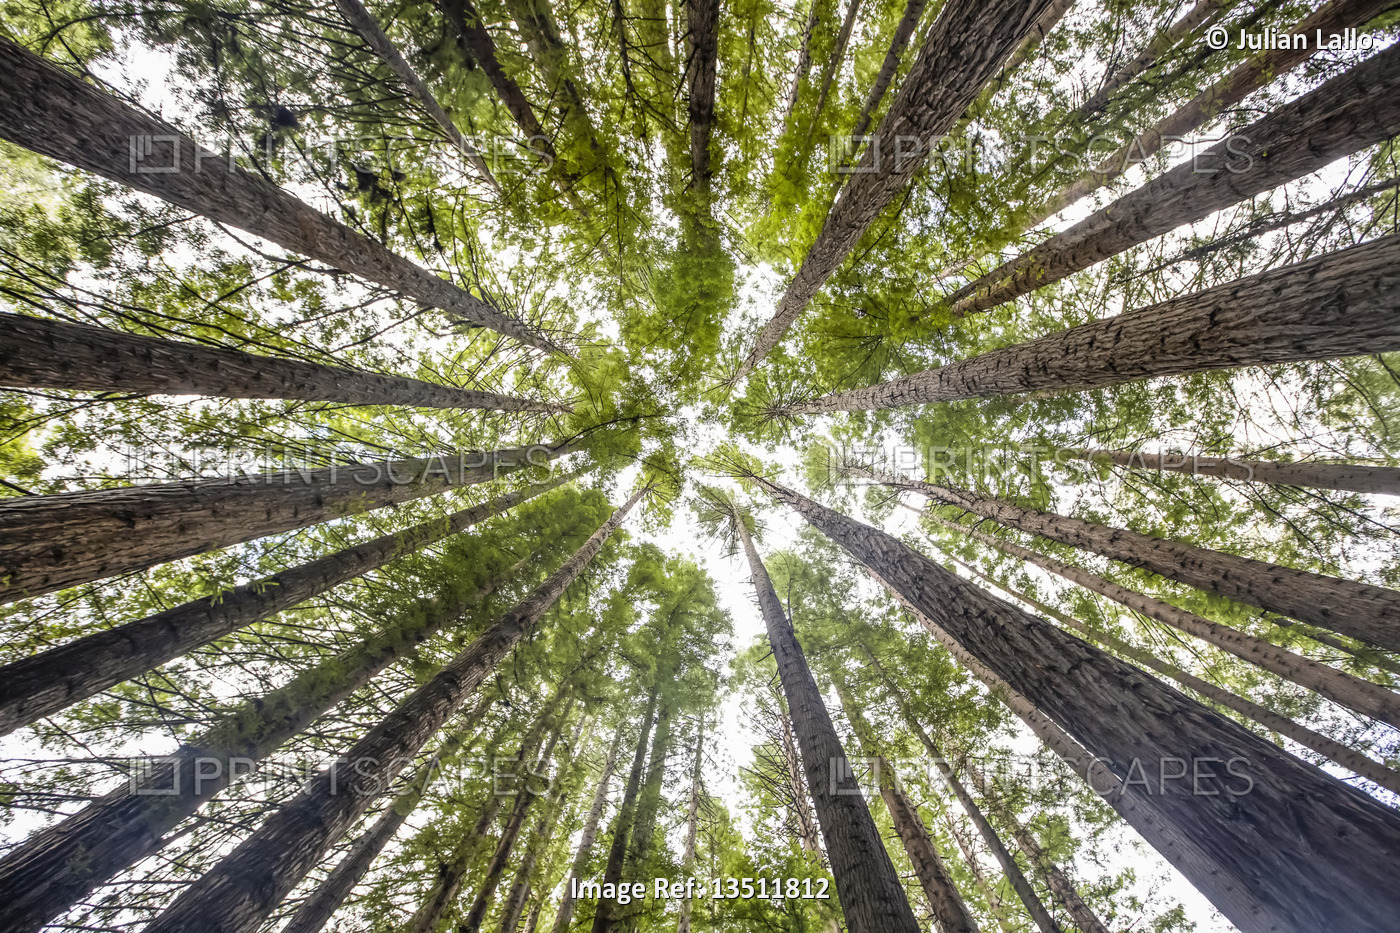 Looking directly up at the treetops of the California Redwoods (Sequoia ...